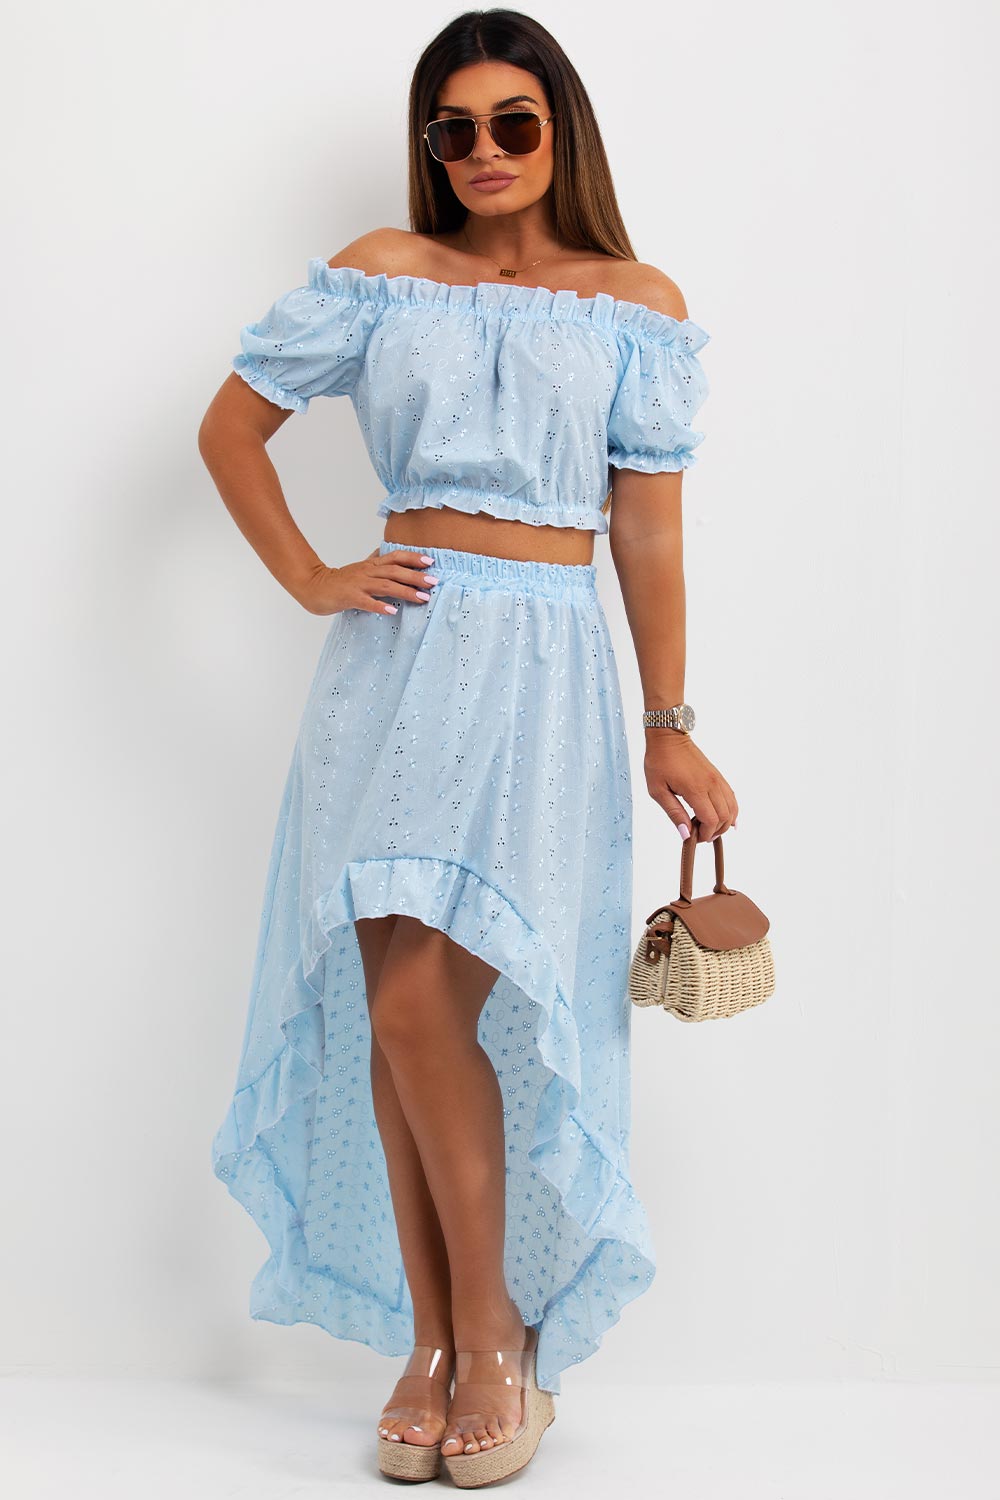 broderie anglaise high low ruffle frilly skirt and bardot crop top co ord set